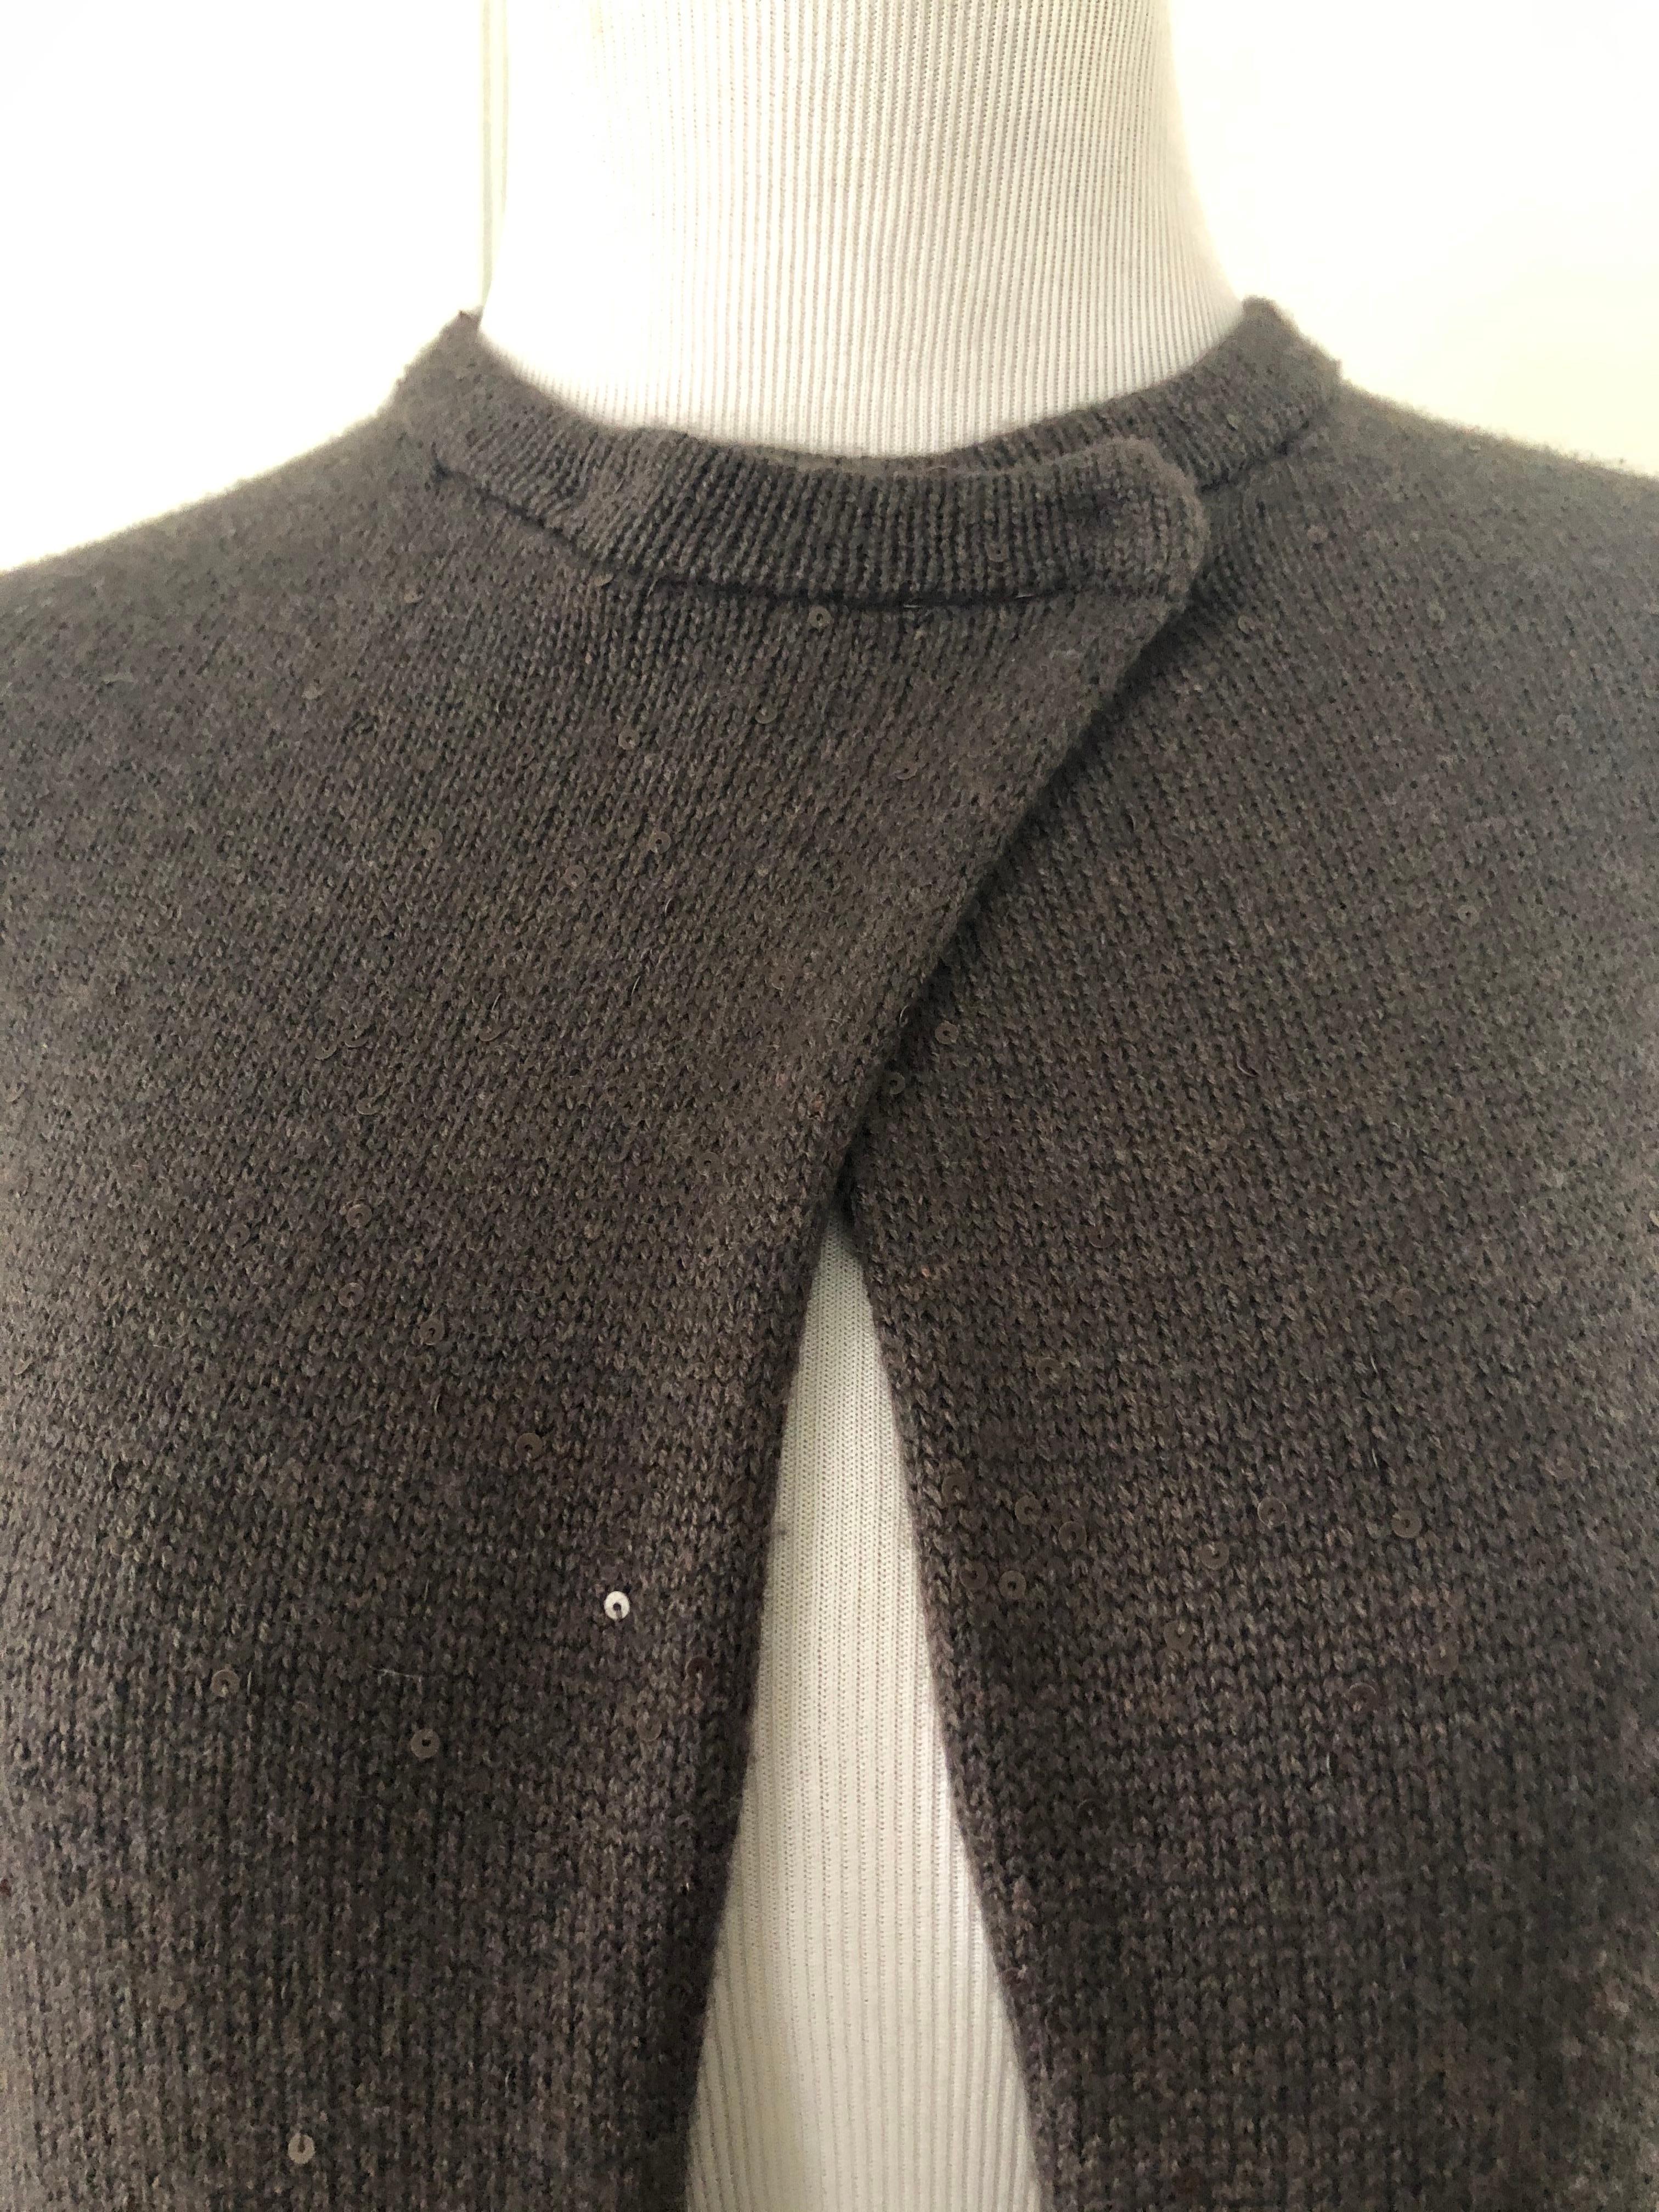 This is a lovely knit cashmere cape sweater with 2 openings for arms with snap closure at the neck.
Discreet sequence all over  the knit. Very good condition.Will keep you warm with a touch of class.
Length     23